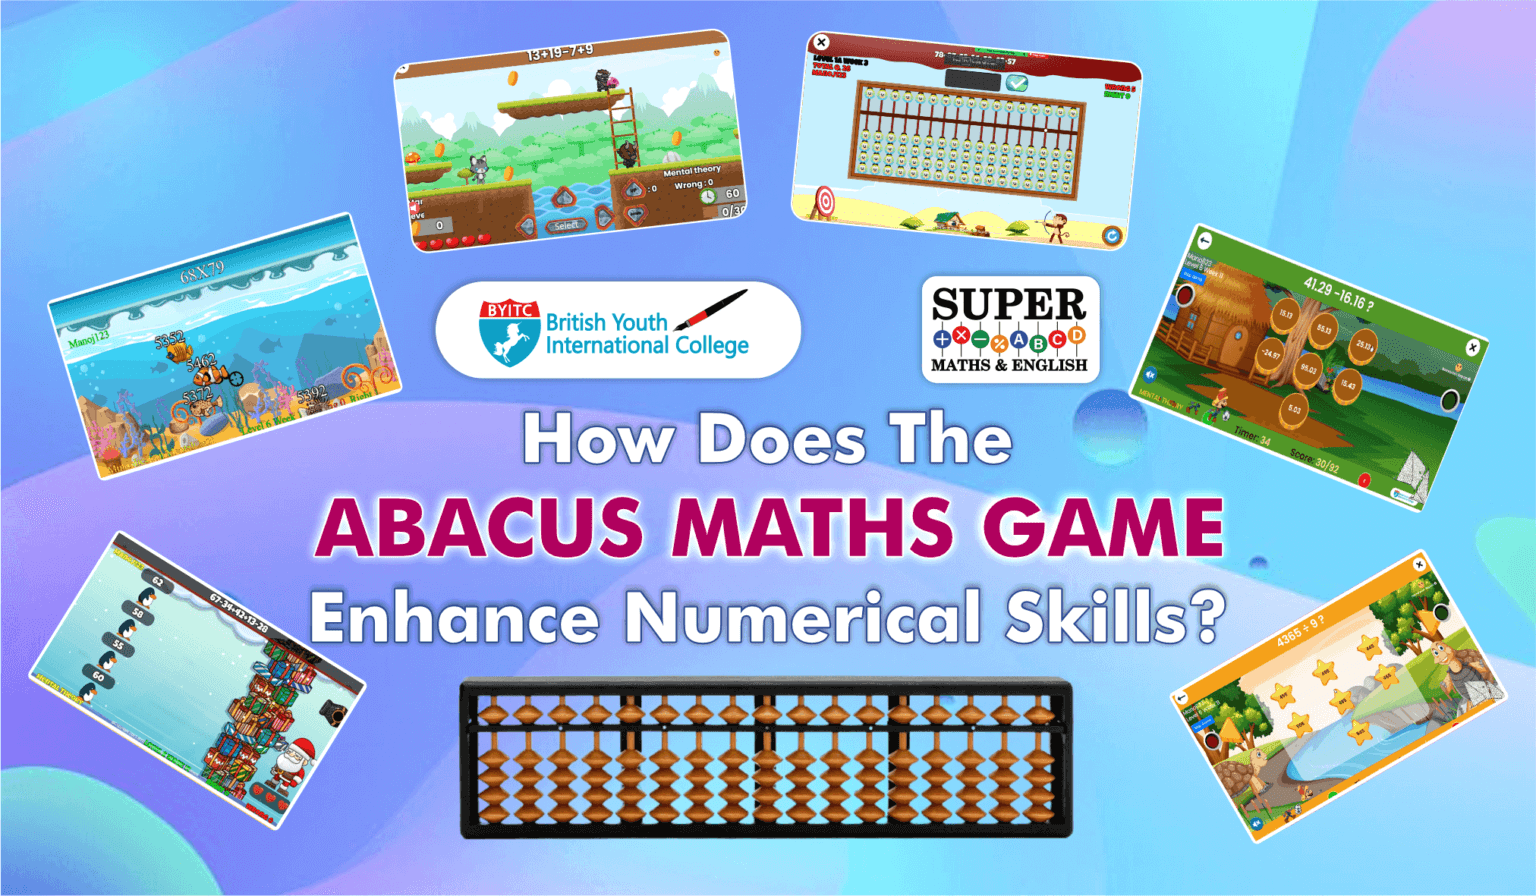 How Does the Abacus Maths Game Enhance Numerical Skills?